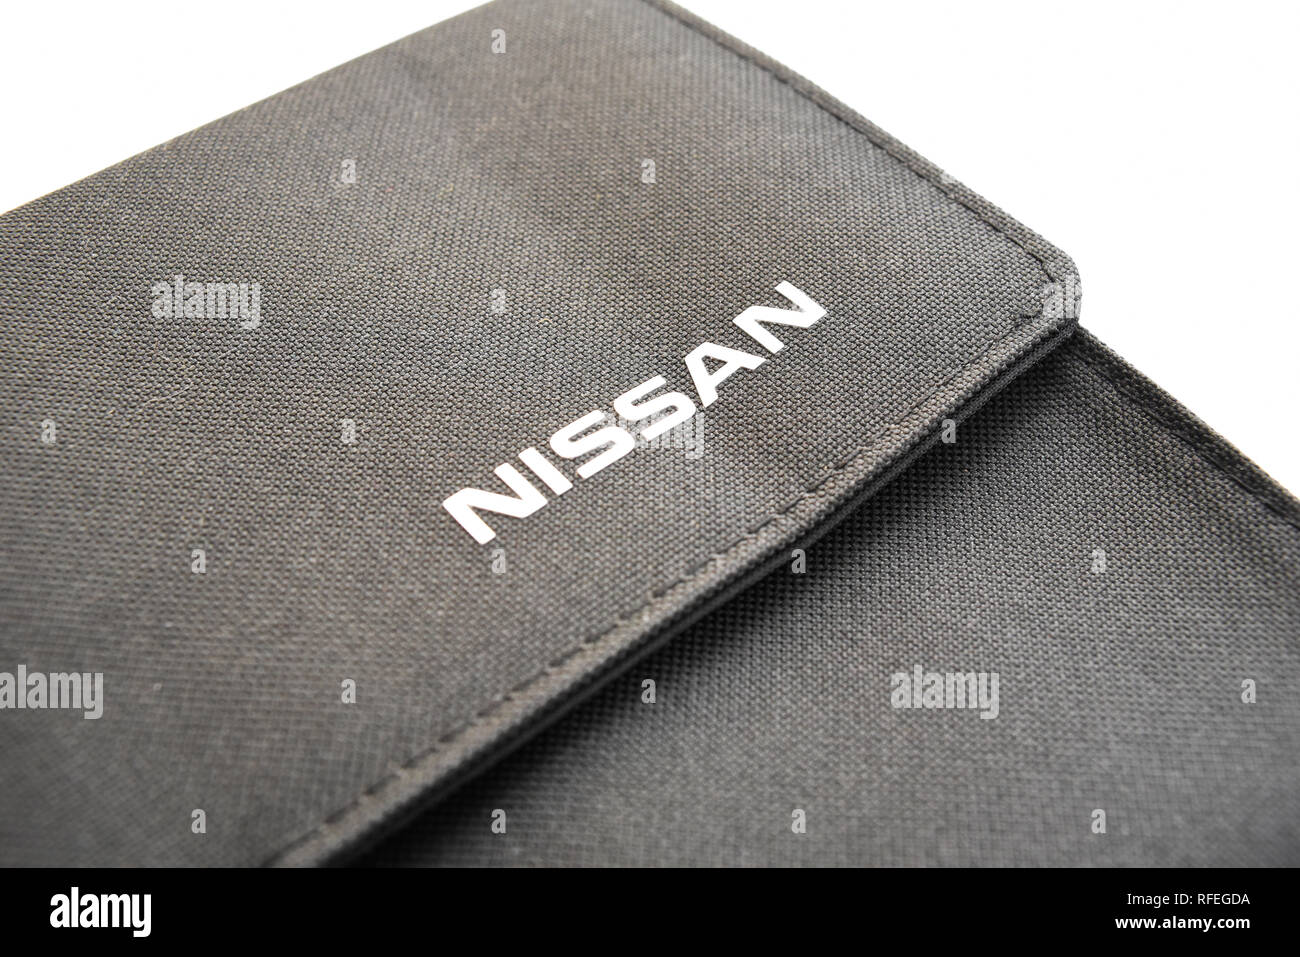 Nissan branded fabric wallet for paperwork. Motor car manufacturer. Nissan brand on folder. Japanese vehicle motoring company logo. Isolated Stock Photo